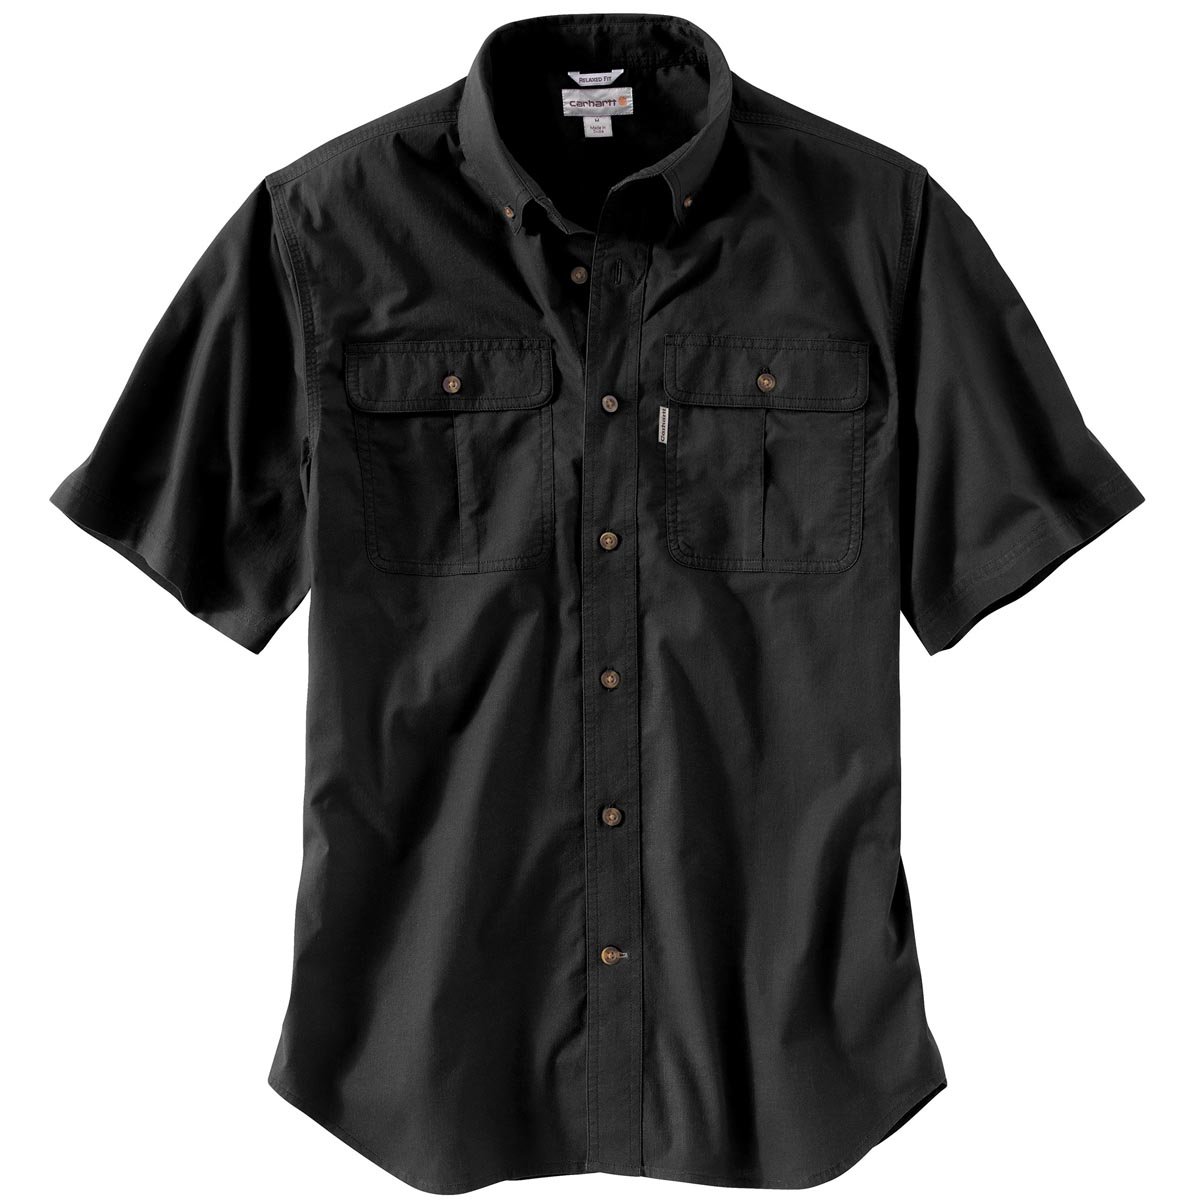 Carhartt Men's Short Sleeve Solid Work Shirt Discontinued Pricing